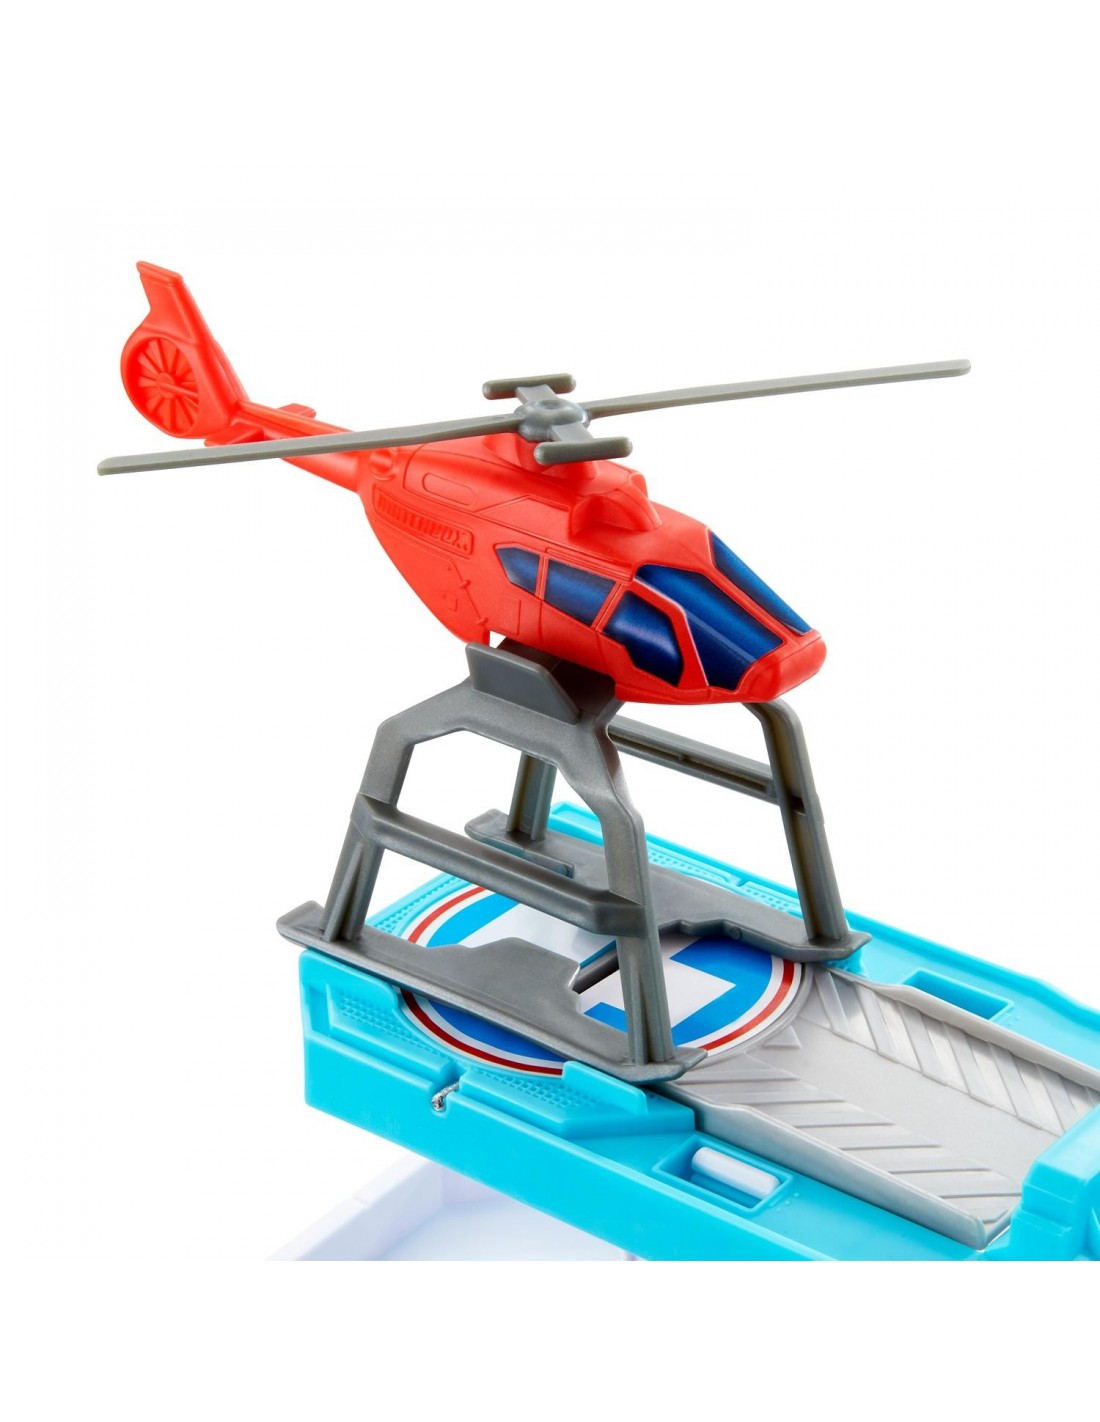 MATCHBOX Action Drivers Helicopter Rescue Playset Μικρά Σετ Δράσης GVY82  - Matchbox